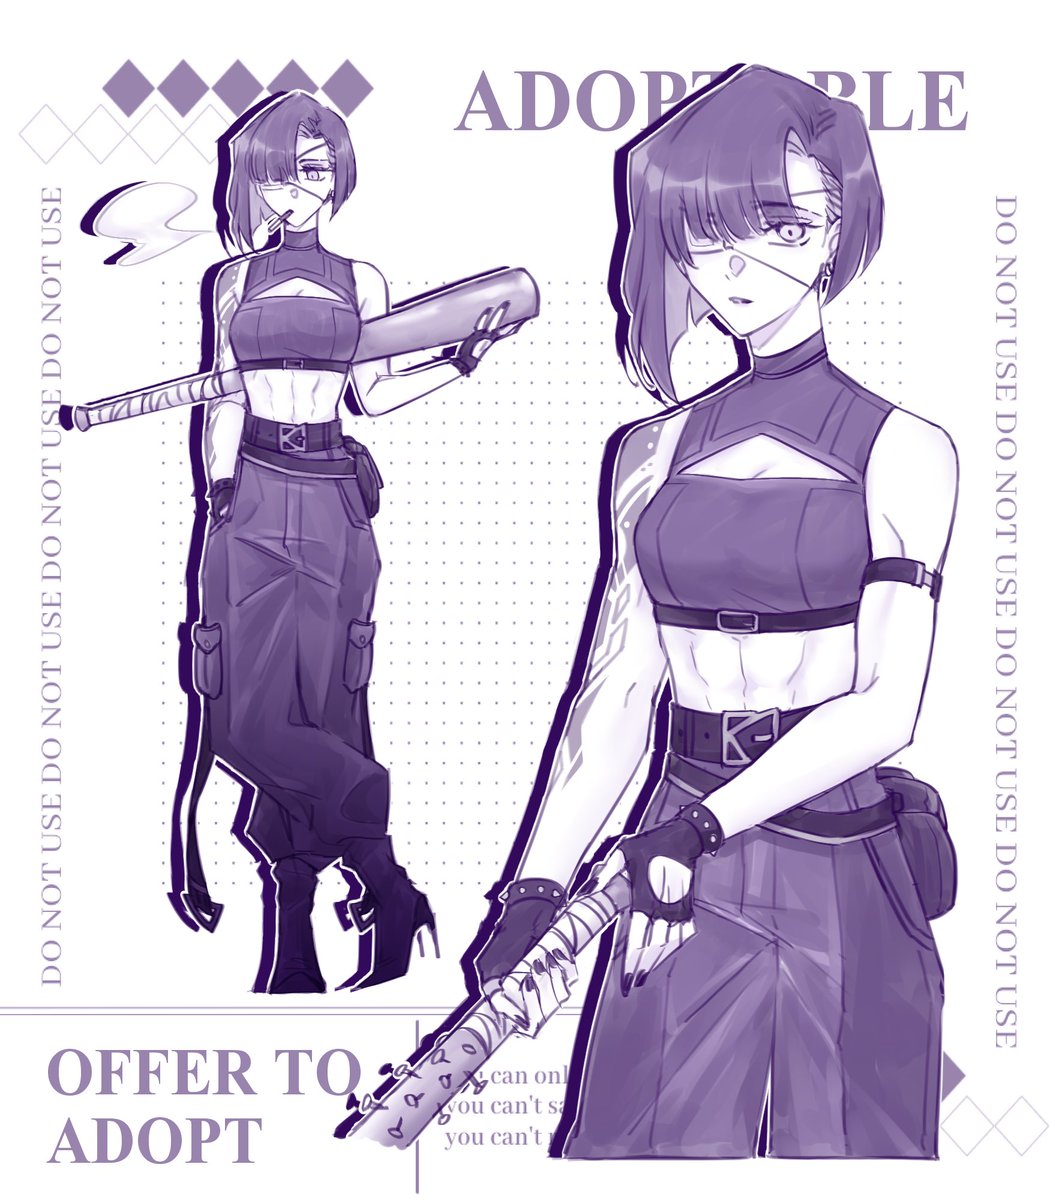 Currently open OTA for this girl on FB 🥺💜 I don't make adopt very often but I'd love to do more if I have ideas

Didn't intend to open it here but you can reply or DM to offer if you're interested 🫶
#adoptables #adopt #offertoadopt #ota 